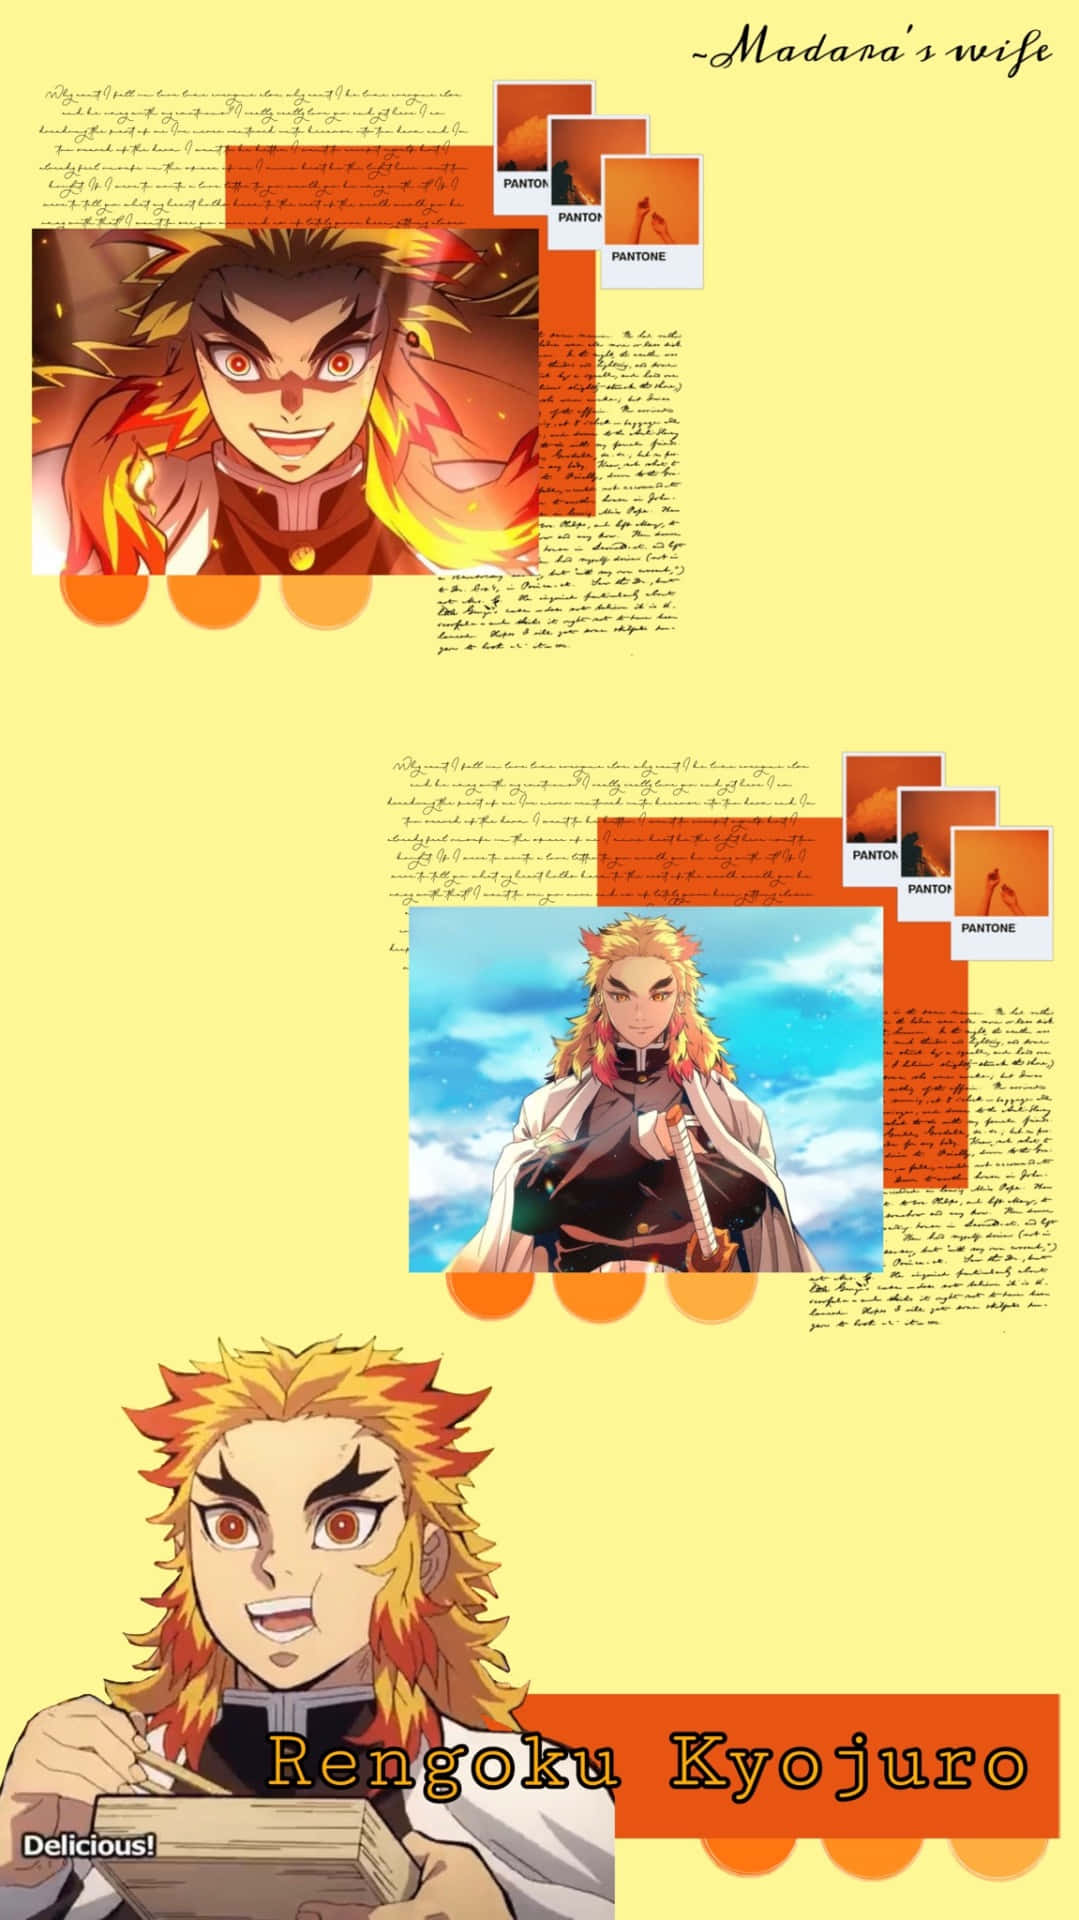 Rengoku Aesthetic - Fiery Passion and Heroic Resolve Wallpaper